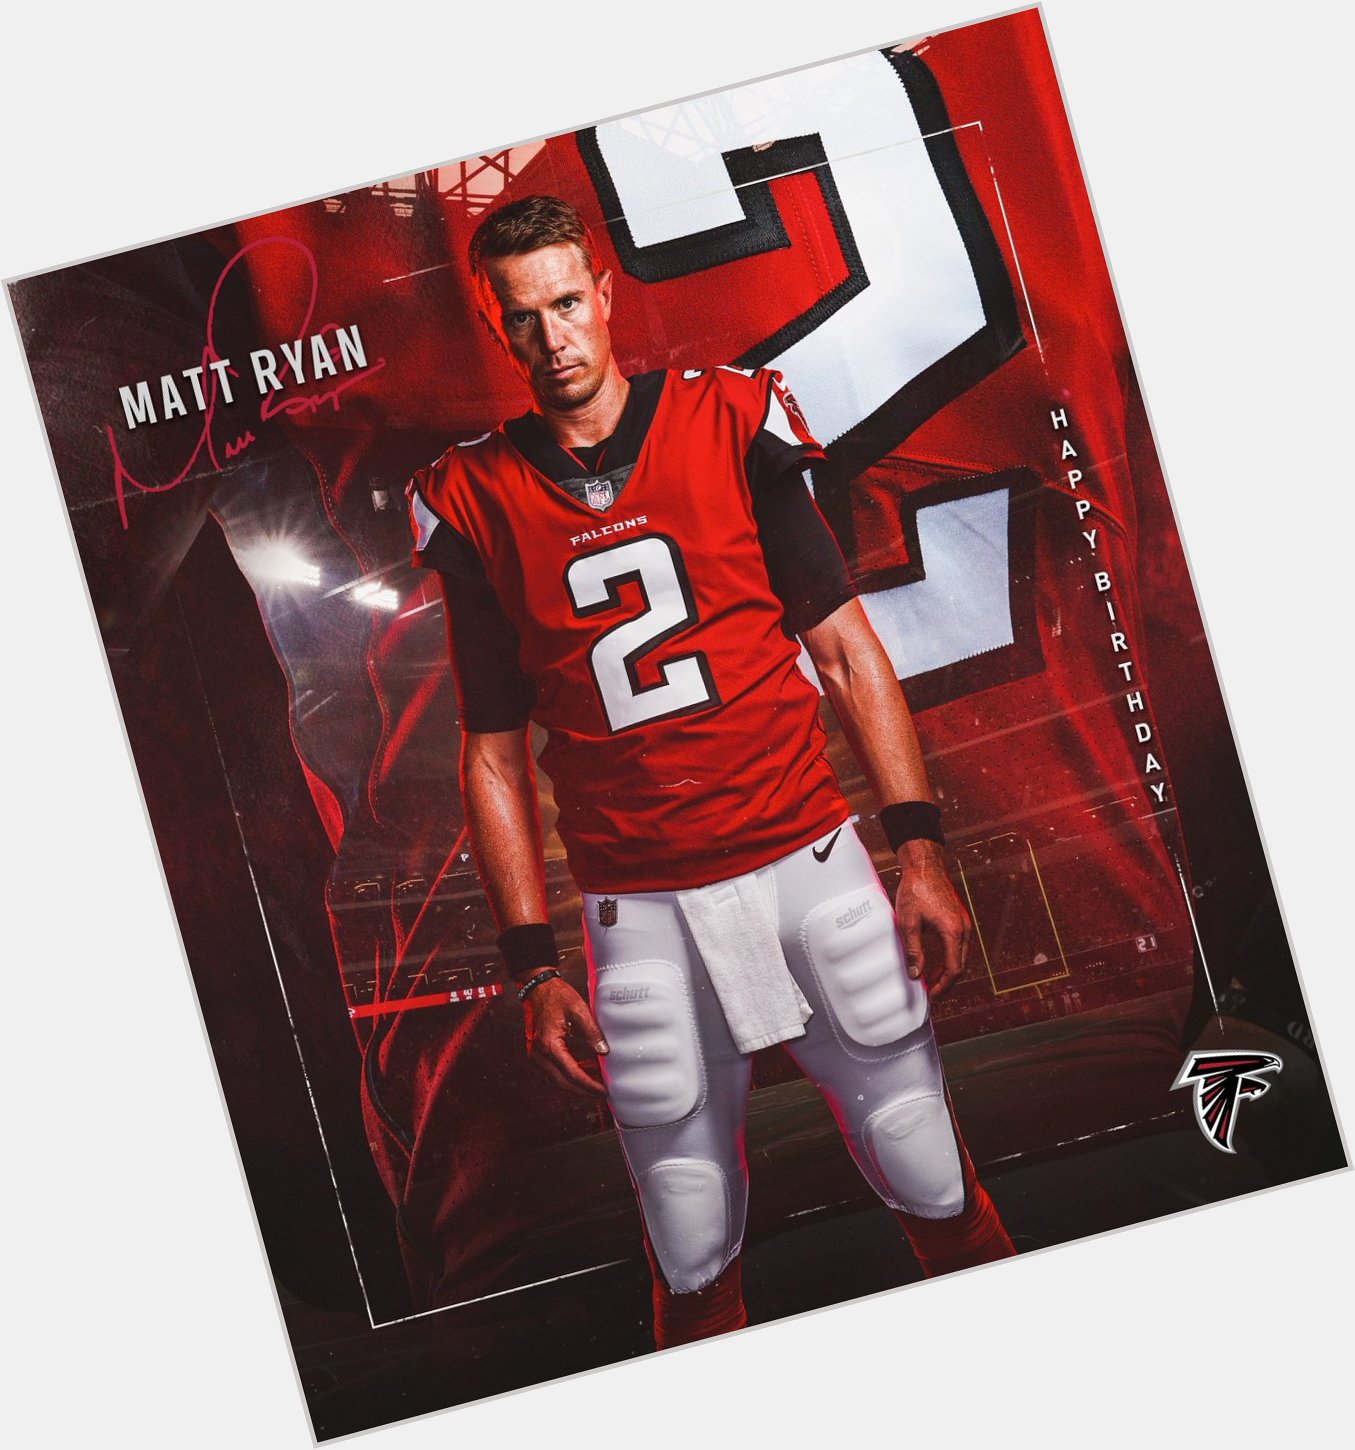 Our leader. Our QB. 

to wish Matt Ryan a happy birthday!

The best is still to come! 